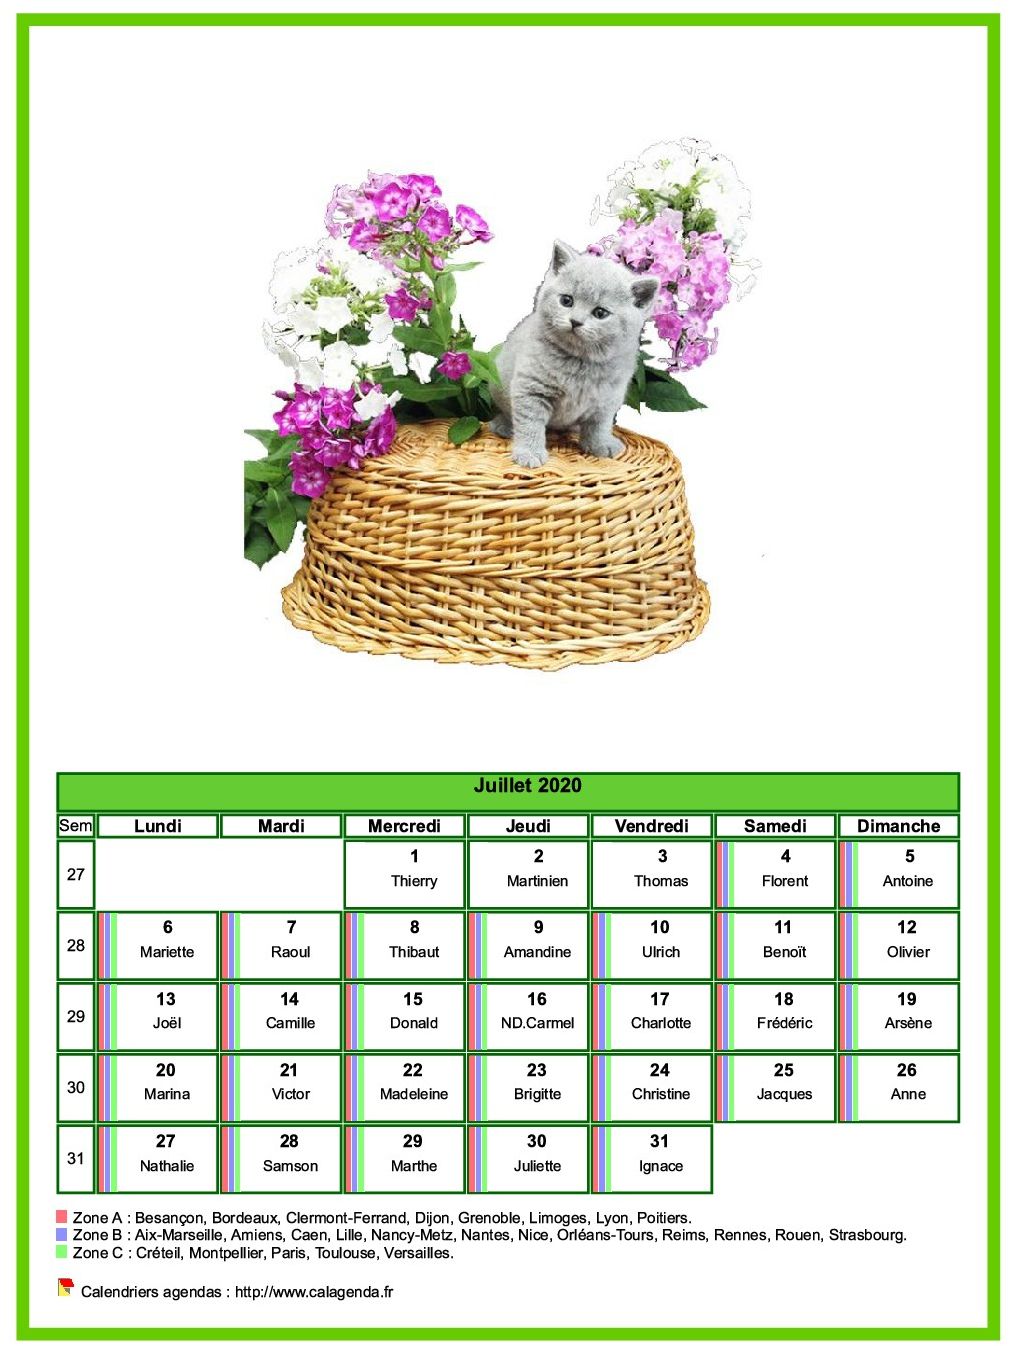 Calendrier juillet 2020 chats